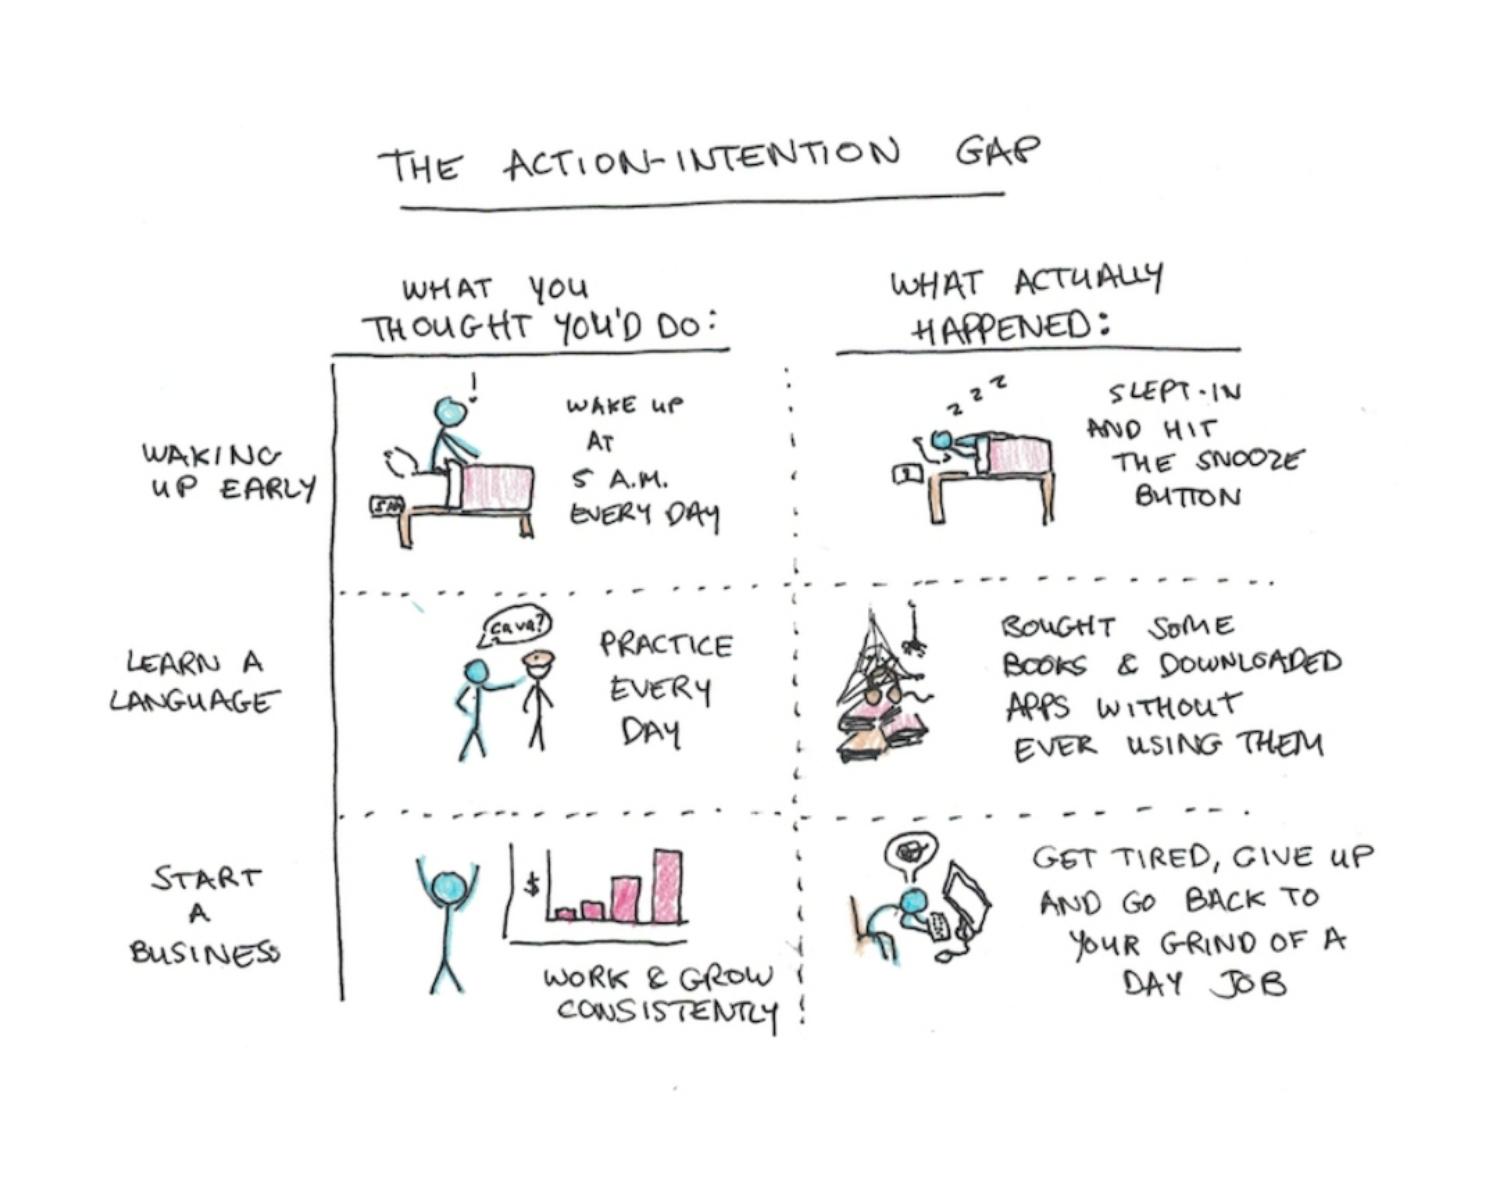 The Action-Intention Gap